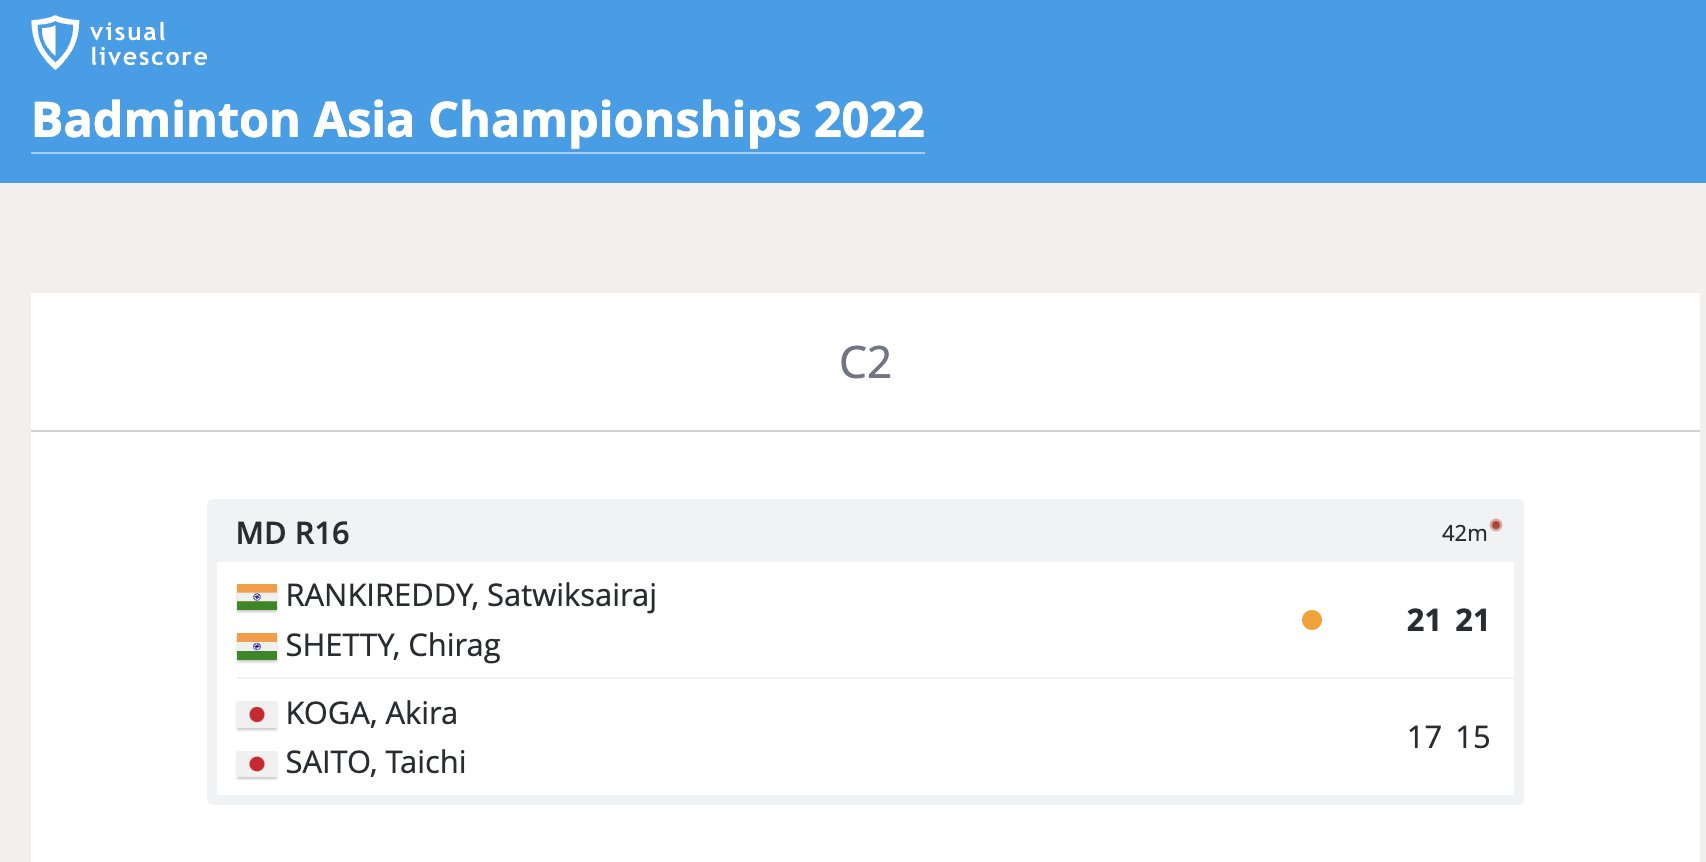 asia cup 2022 channel